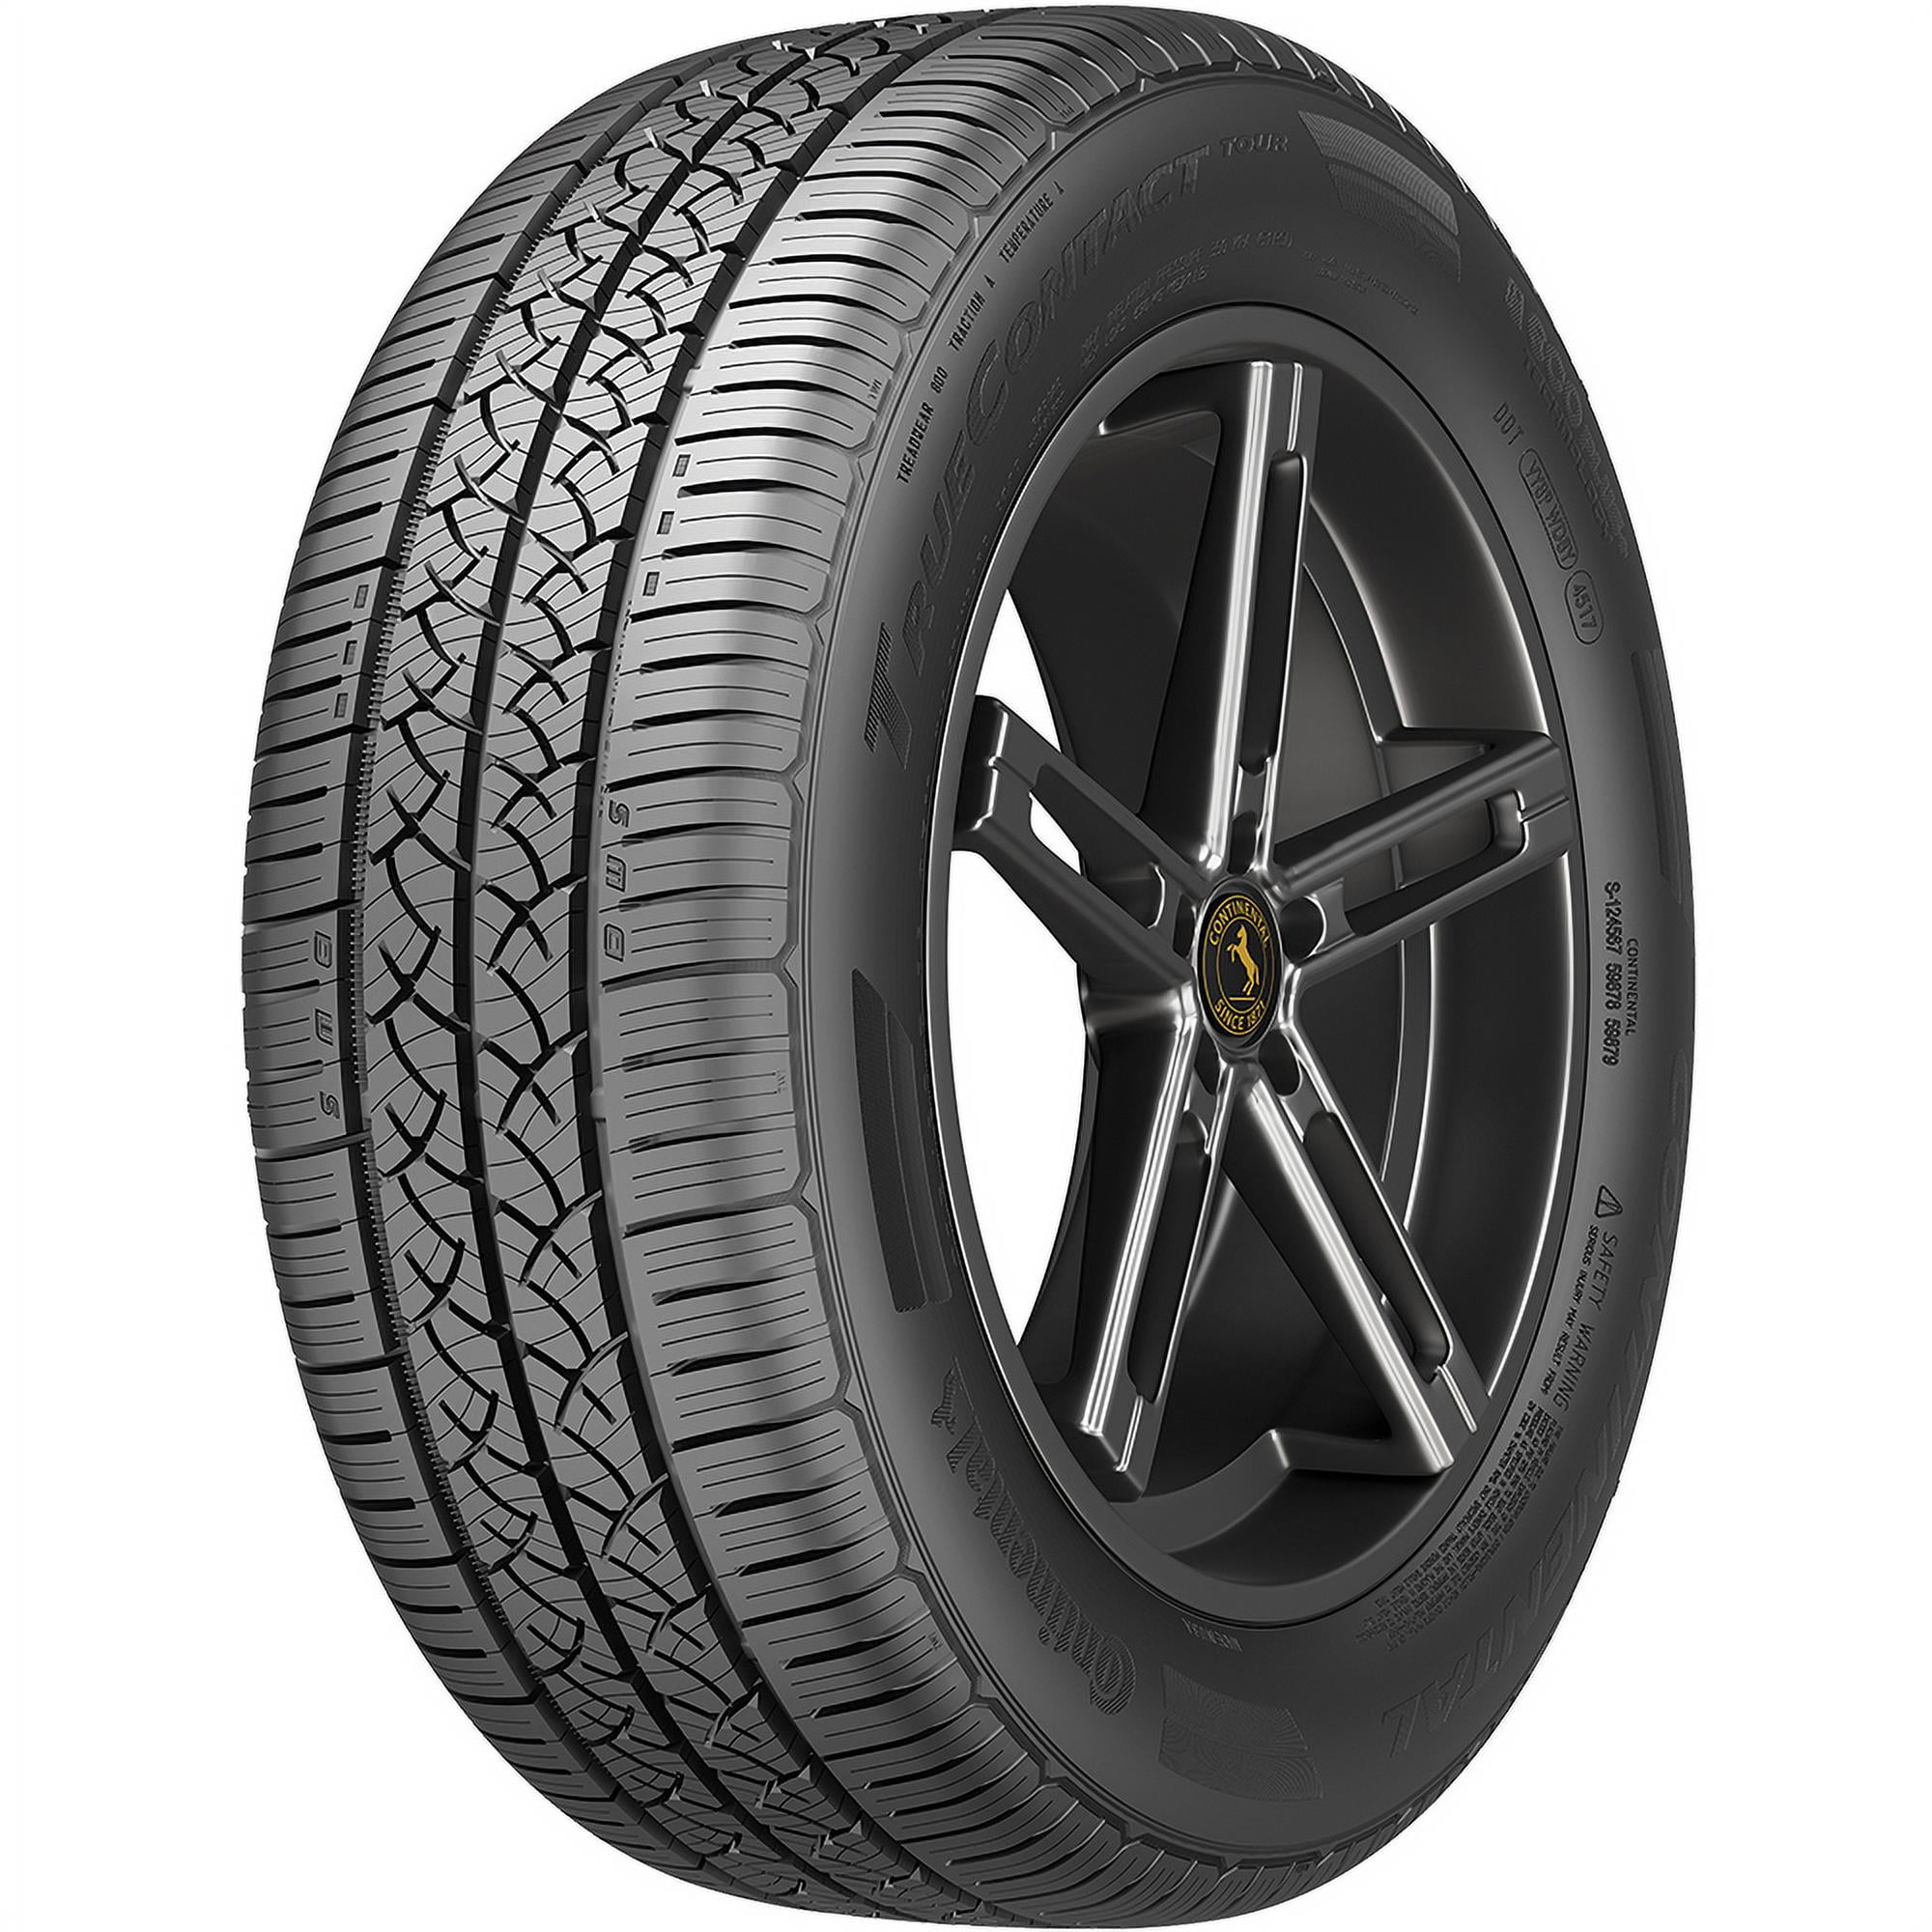 Season TrueContact All Tour 84H BSW Tire Continental 175/65R15